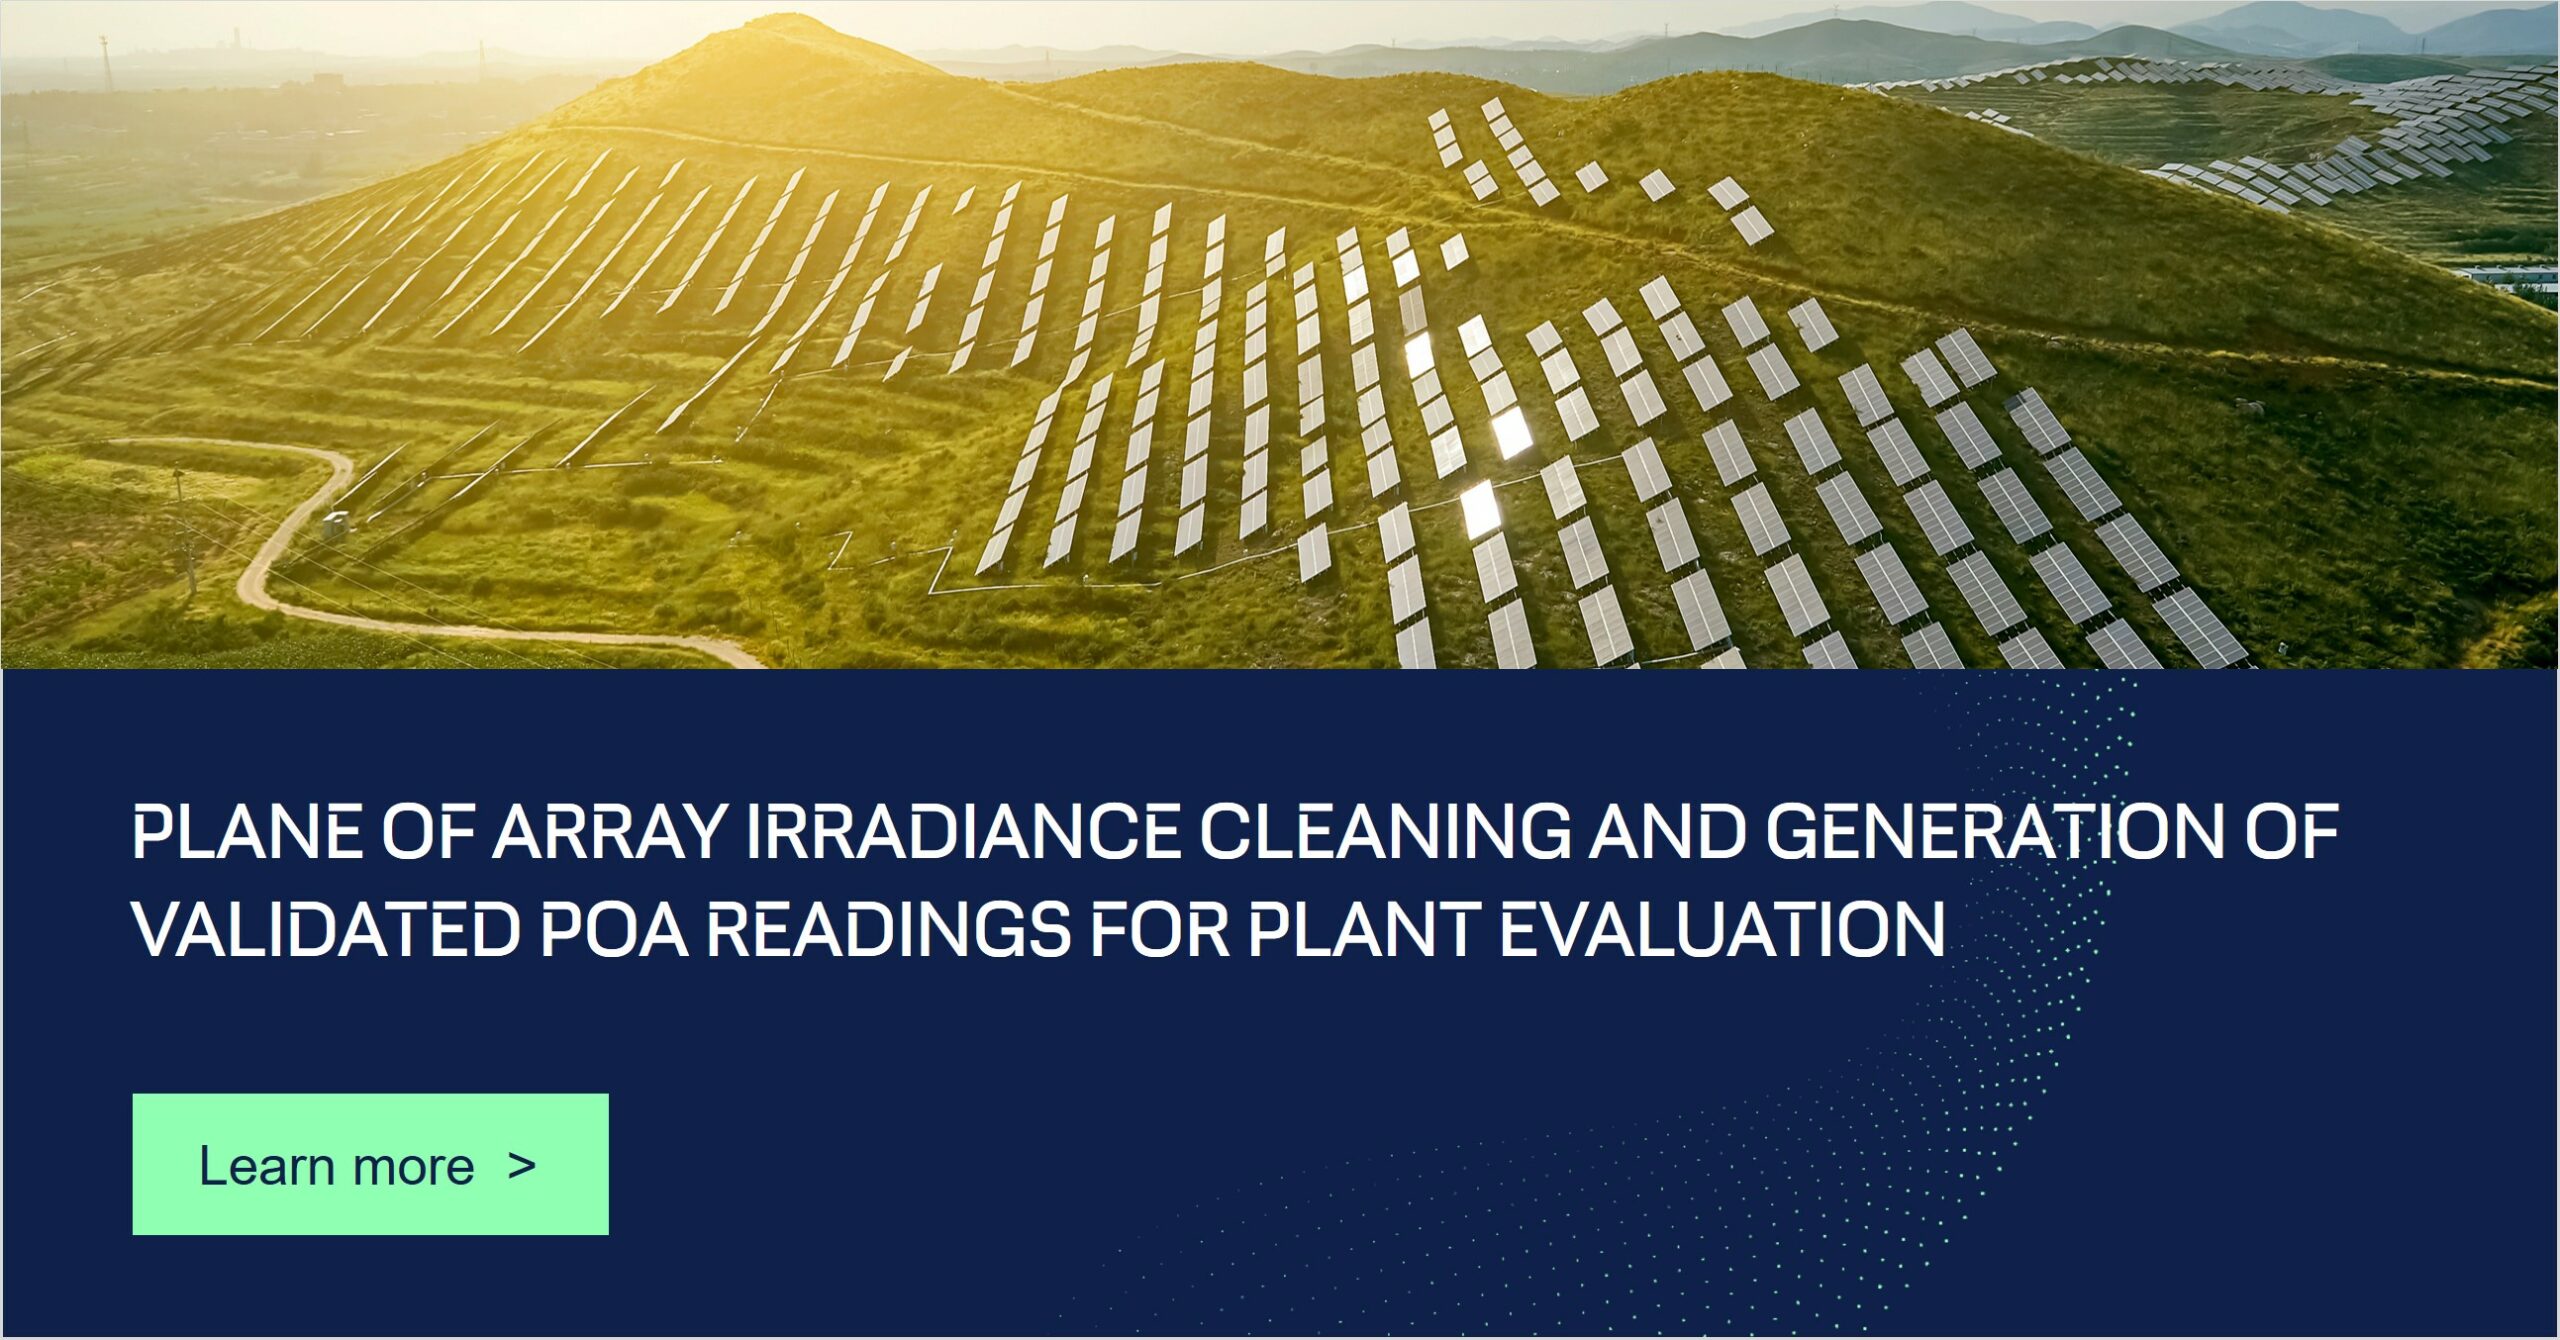 A comprehensive guide to cleaning and validating Plane of Array (POA) Irradiance Readings